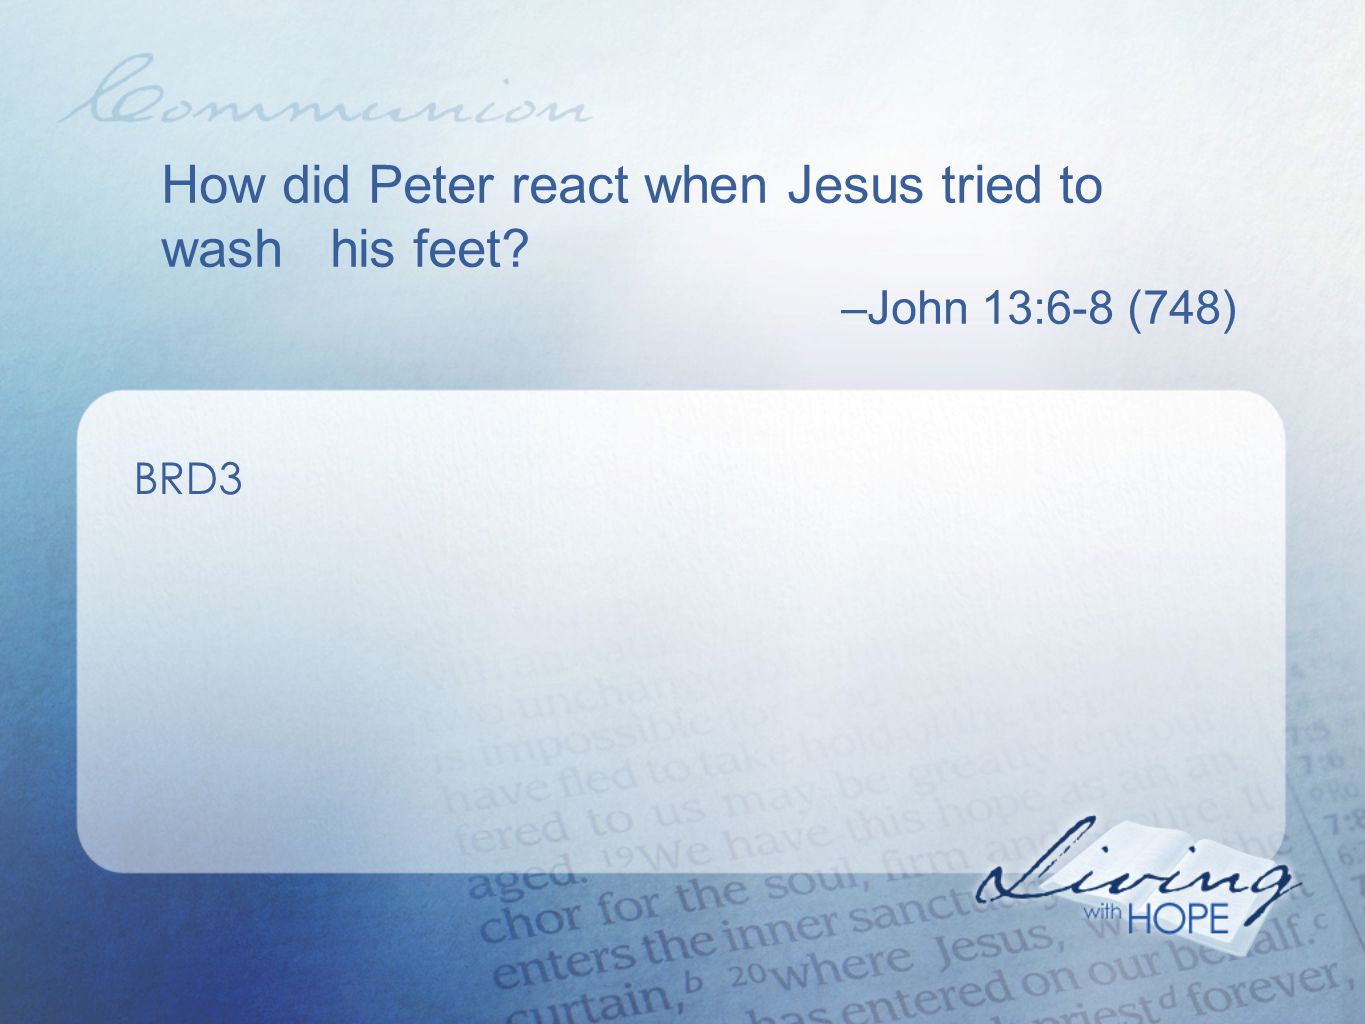 How did Peter react when Jesus tried to wash his feet